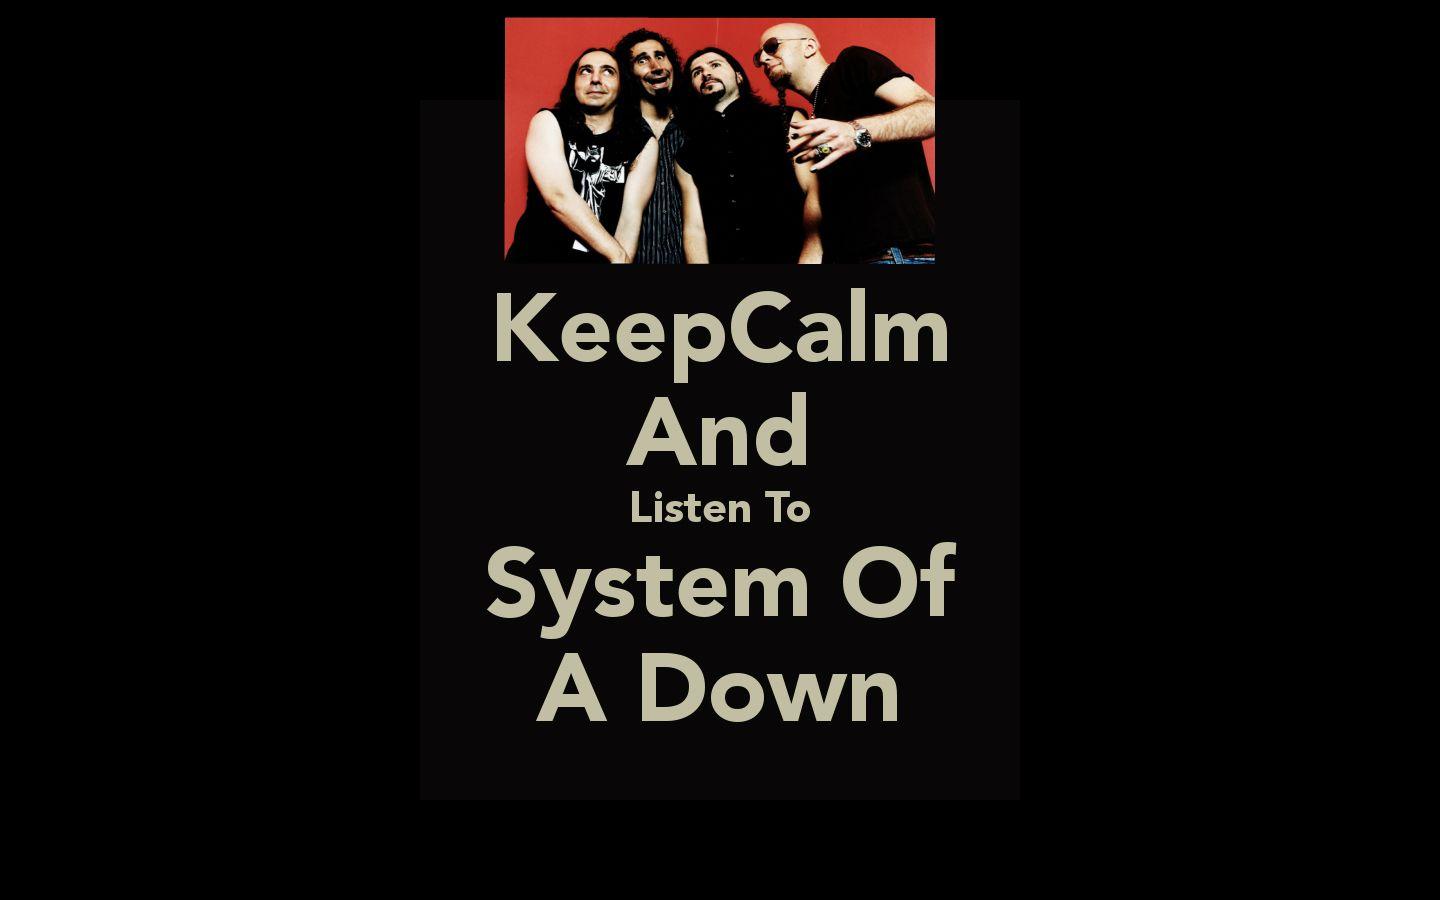 System Of A Down Wallpaper. System Of A Down Background